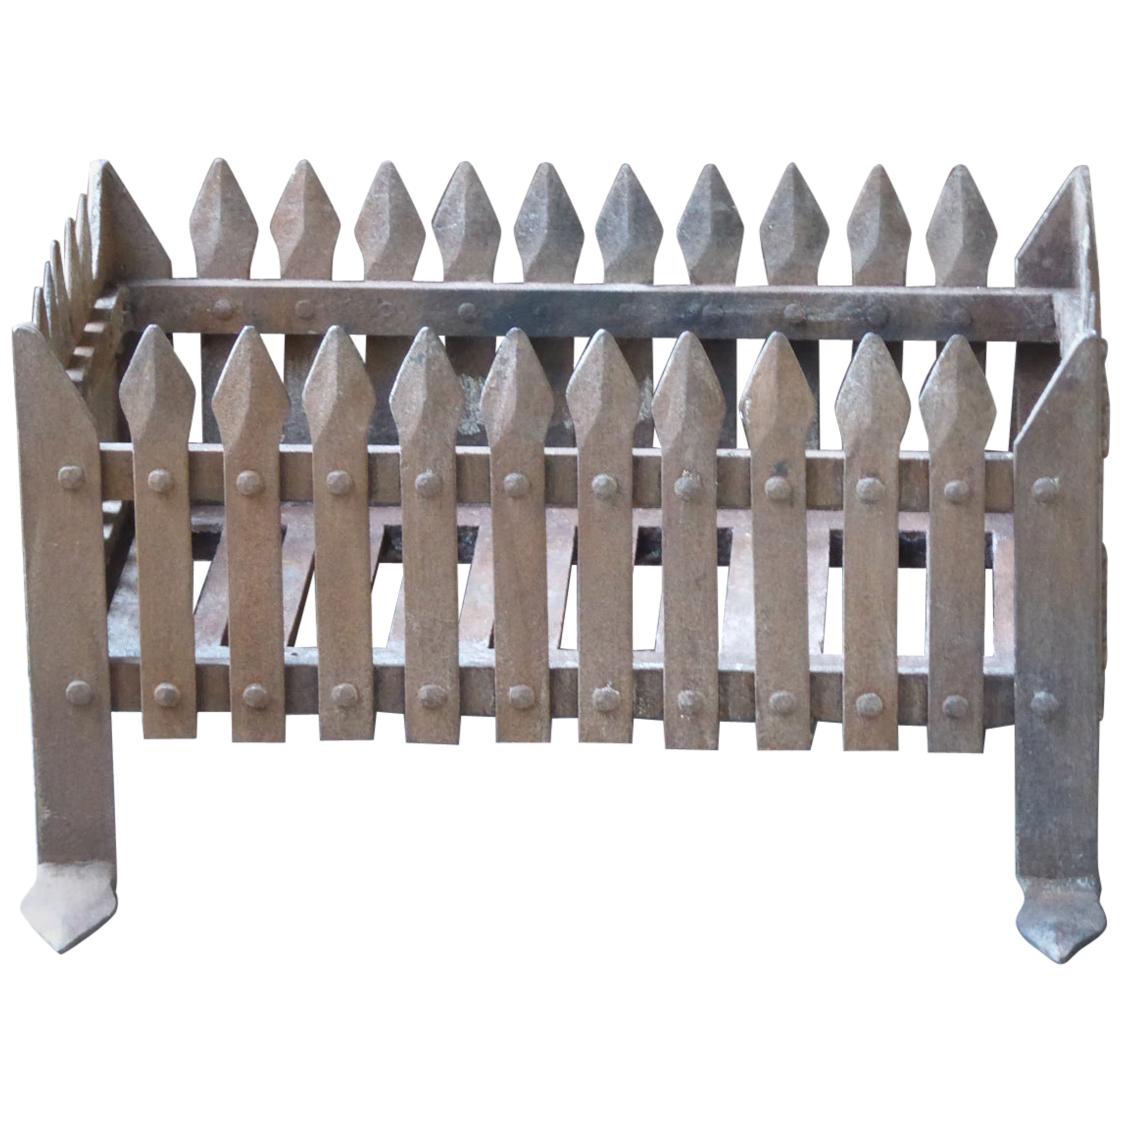 English Neo Gothic Style Fireplace Grate, Fire Grate For Sale